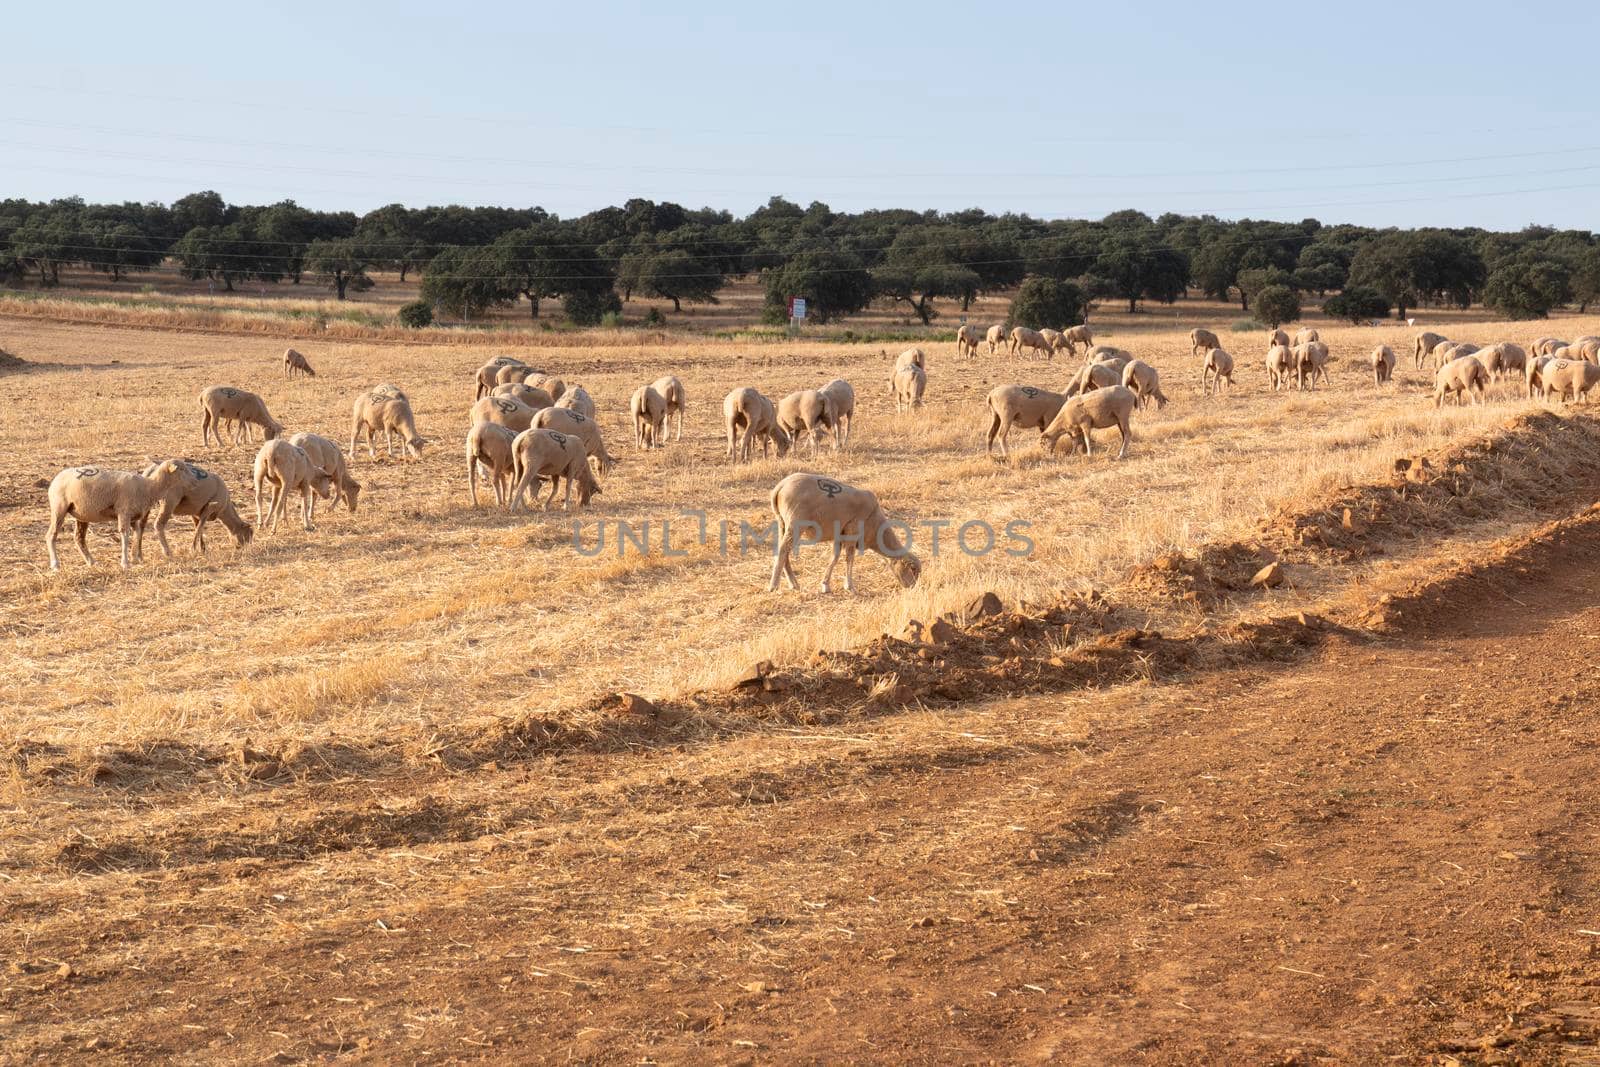 Sheep grazing in a dry cereal field by loopneo